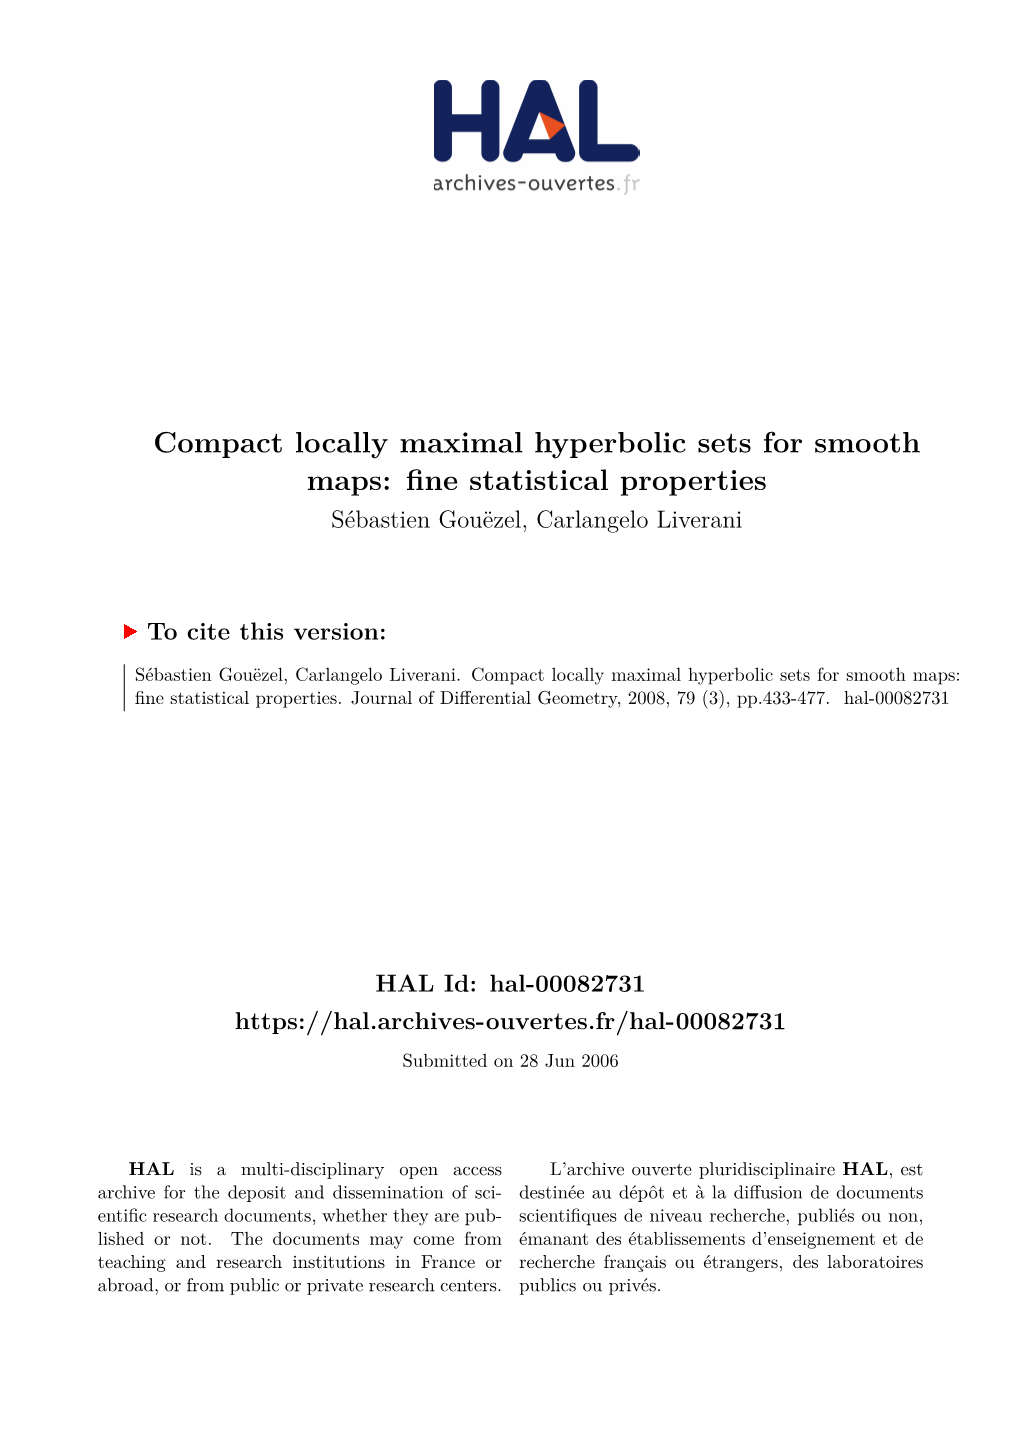 Compact Locally Maximal Hyperbolic Sets for Smooth Maps: Fine Statistical Properties Sébastien Gouëzel, Carlangelo Liverani